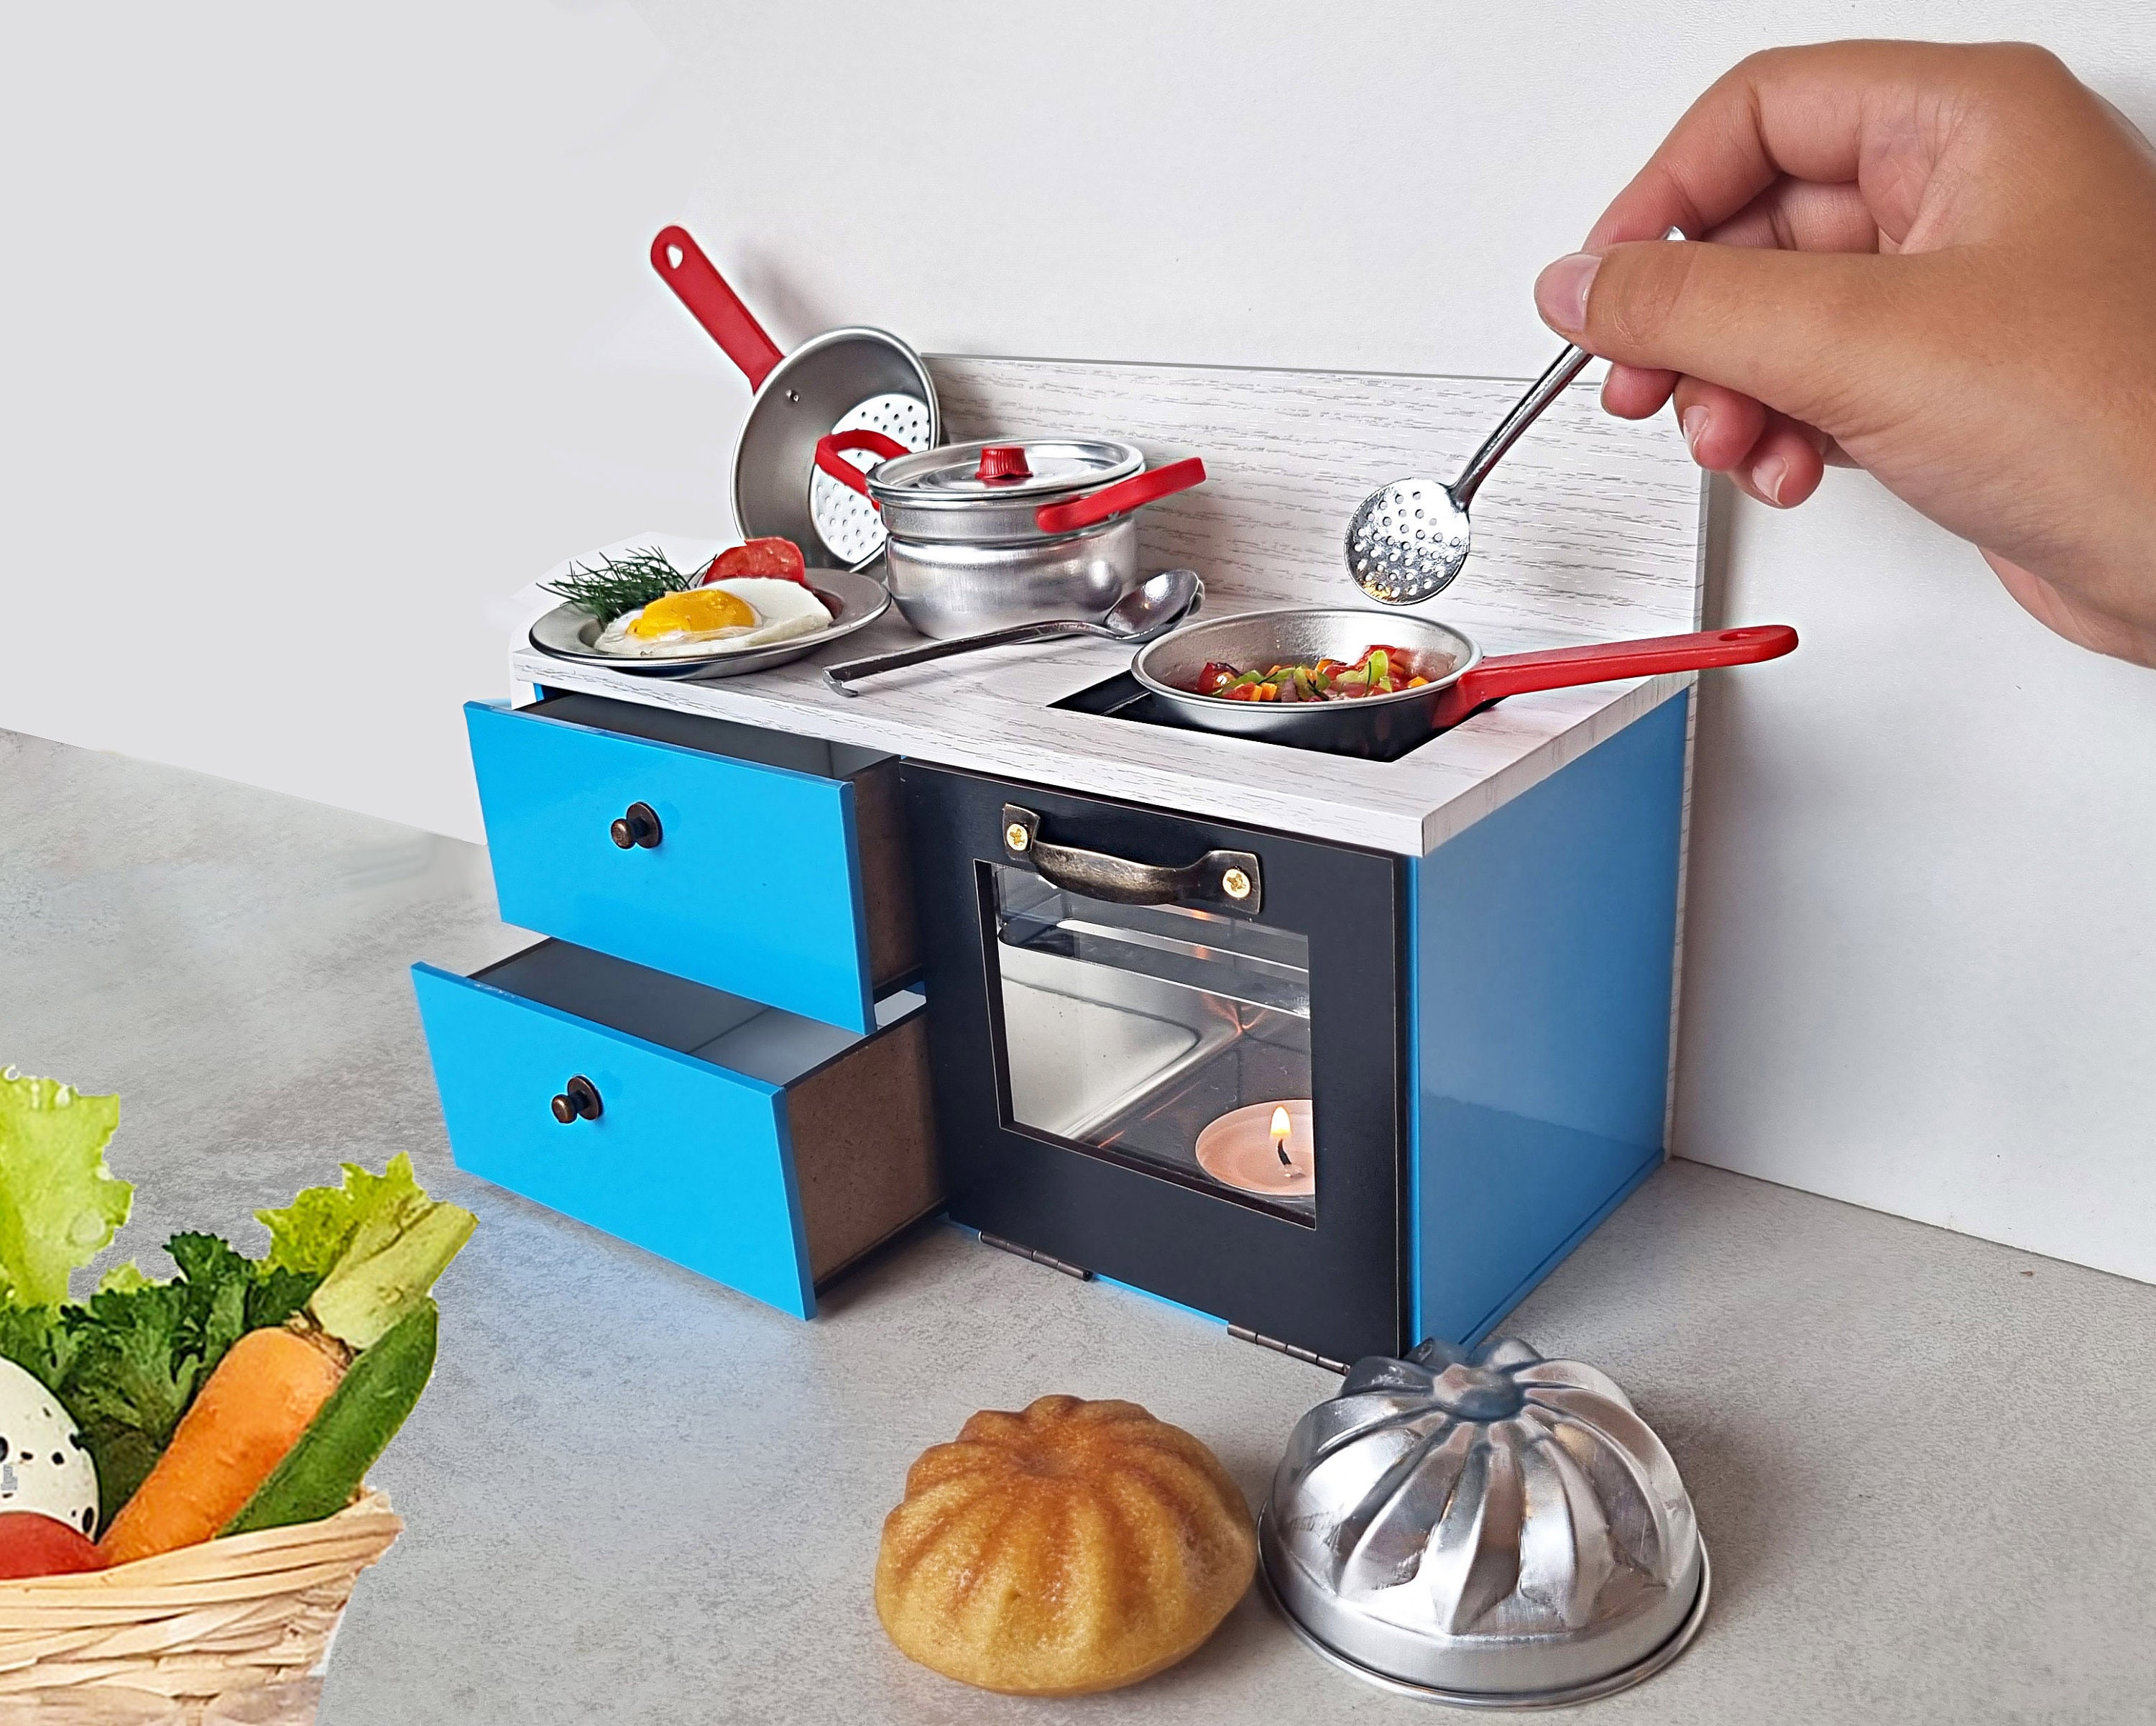 Tiny Kitchen Set For Cooking Real Food Portable Kids Cooking Sets For Girls  9-12 Lightweight Stove For Real Cooking Kids Playing - Outdoor Stove &  Accessories - AliExpress